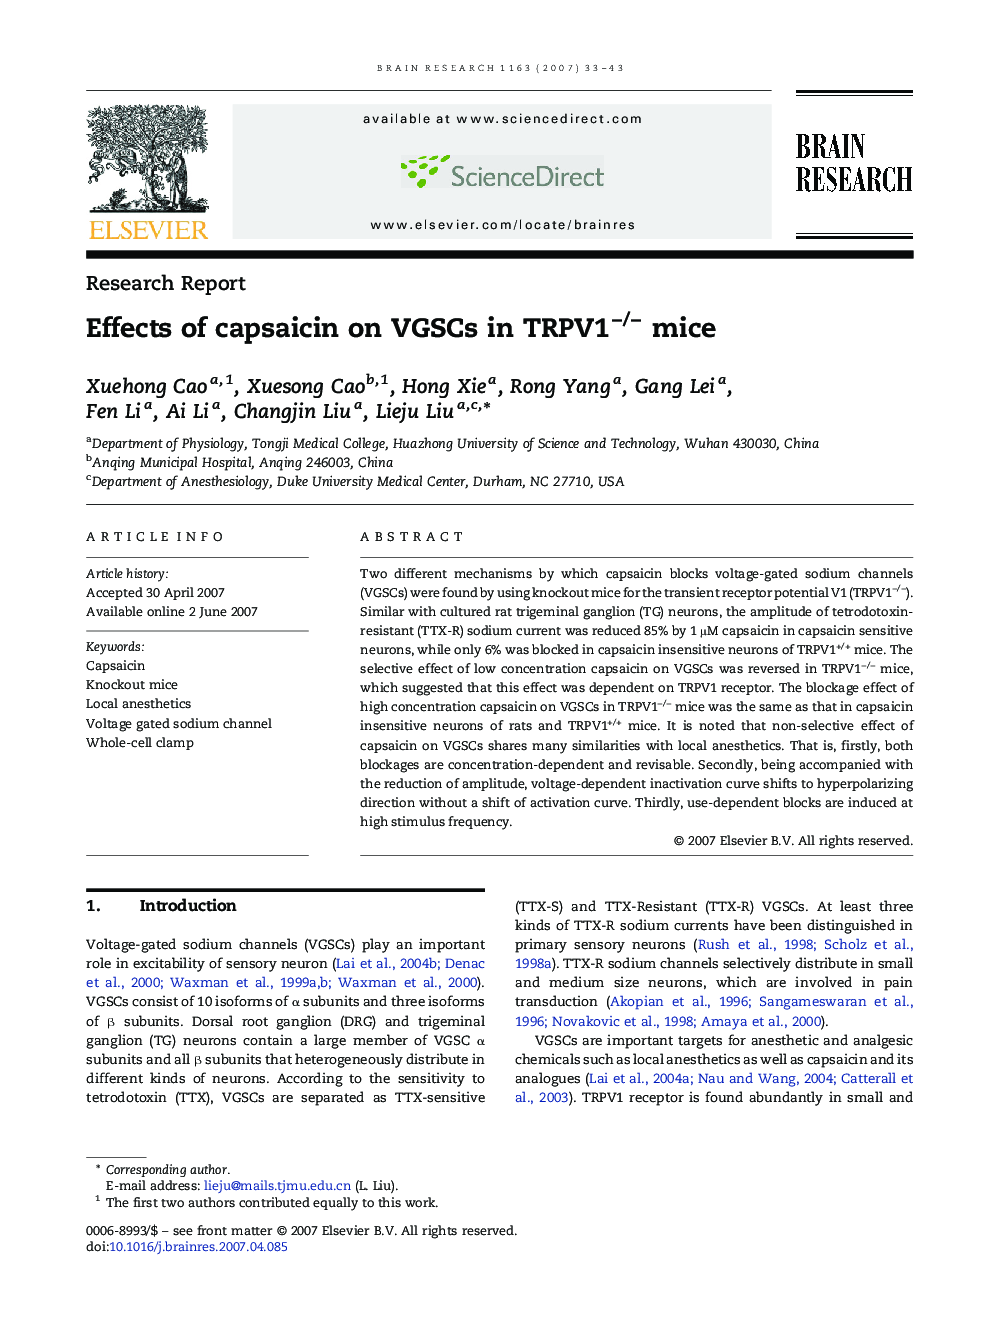 Effects of capsaicin on VGSCs in TRPV1−/− mice